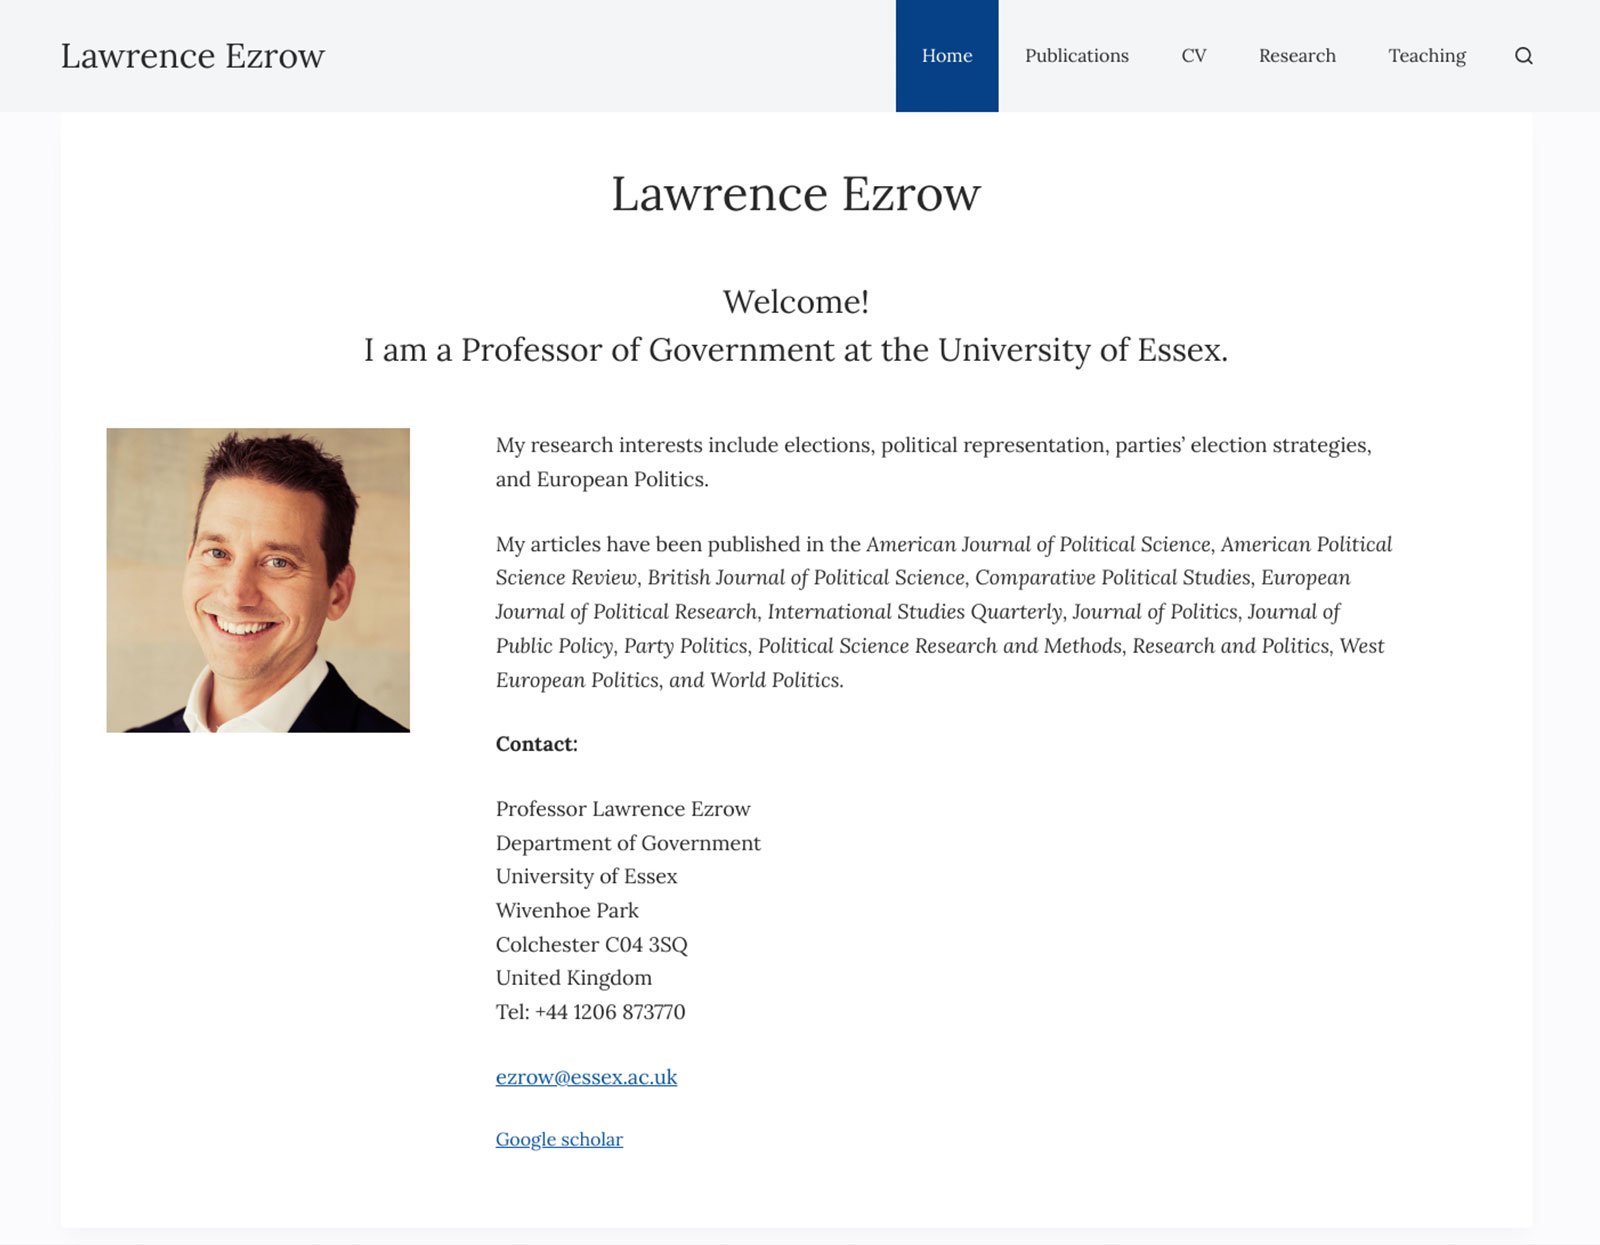 Image of Paul Hailes Design work for Lawrence Ezrow, Professor of Government, University of Essex.